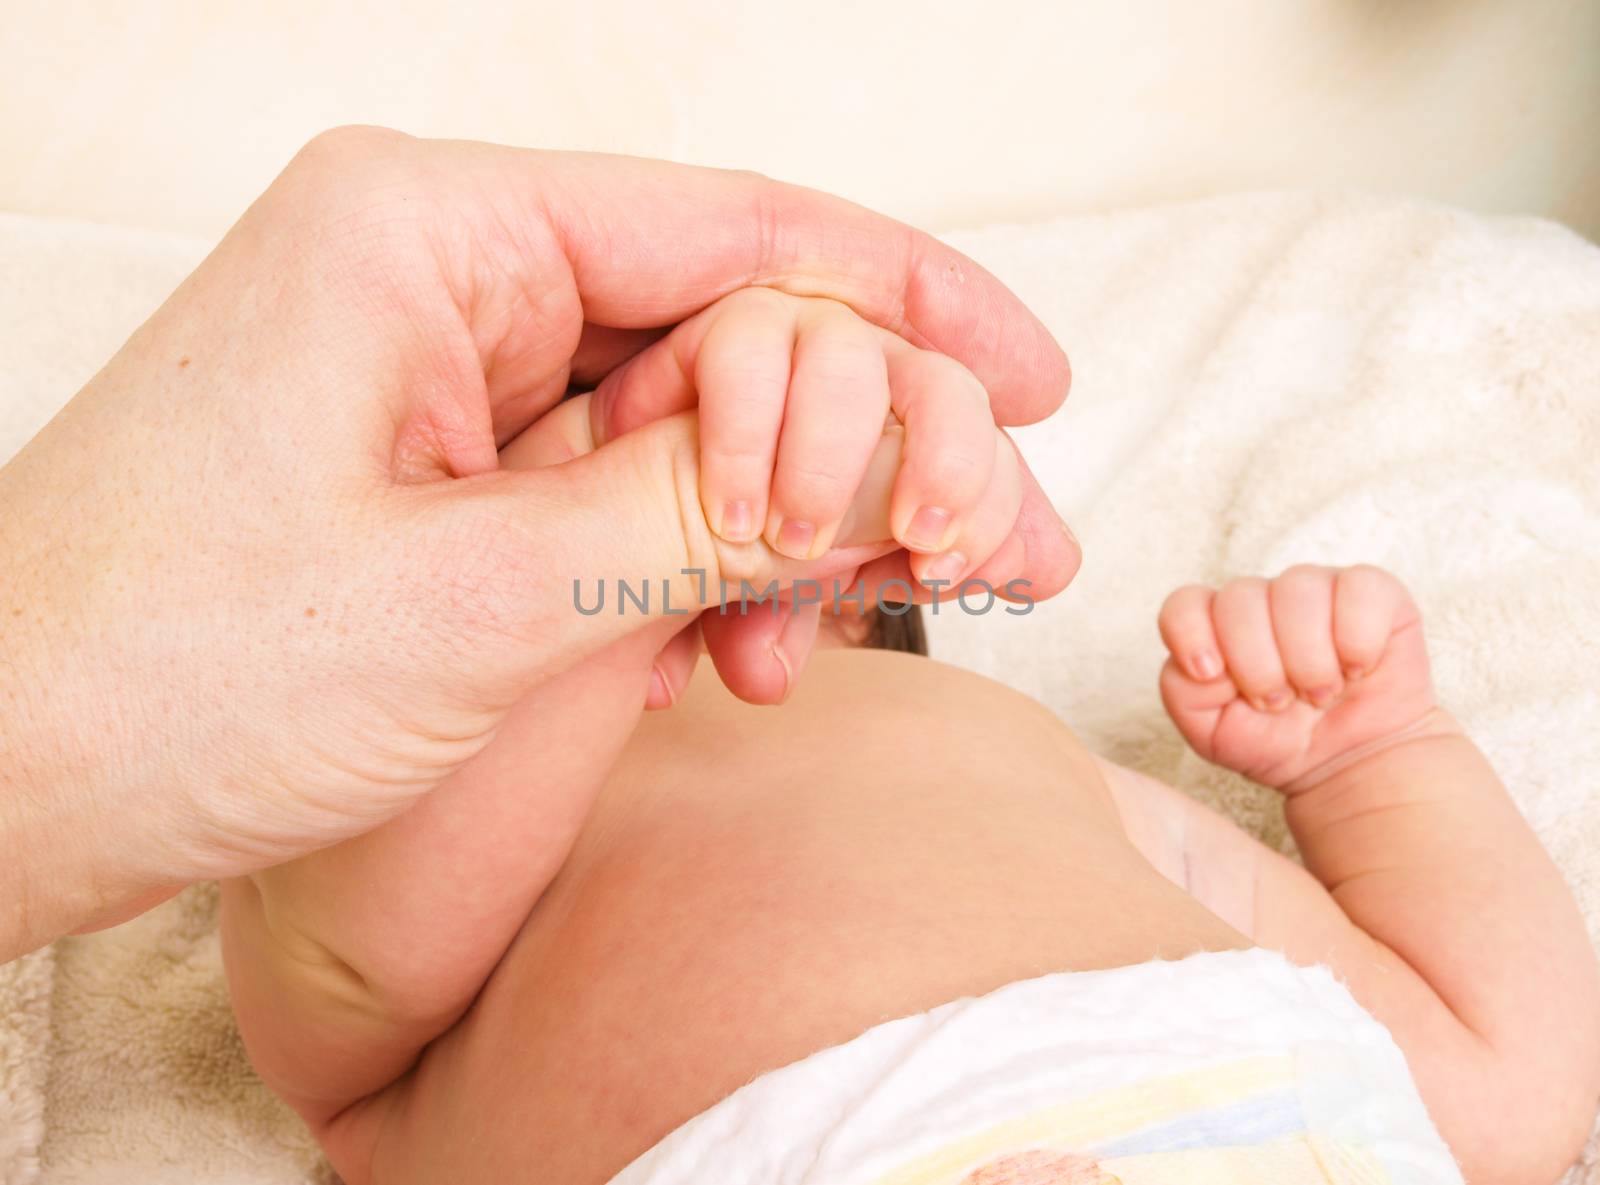 Newborn baby holding onto finger of parent after new diaper